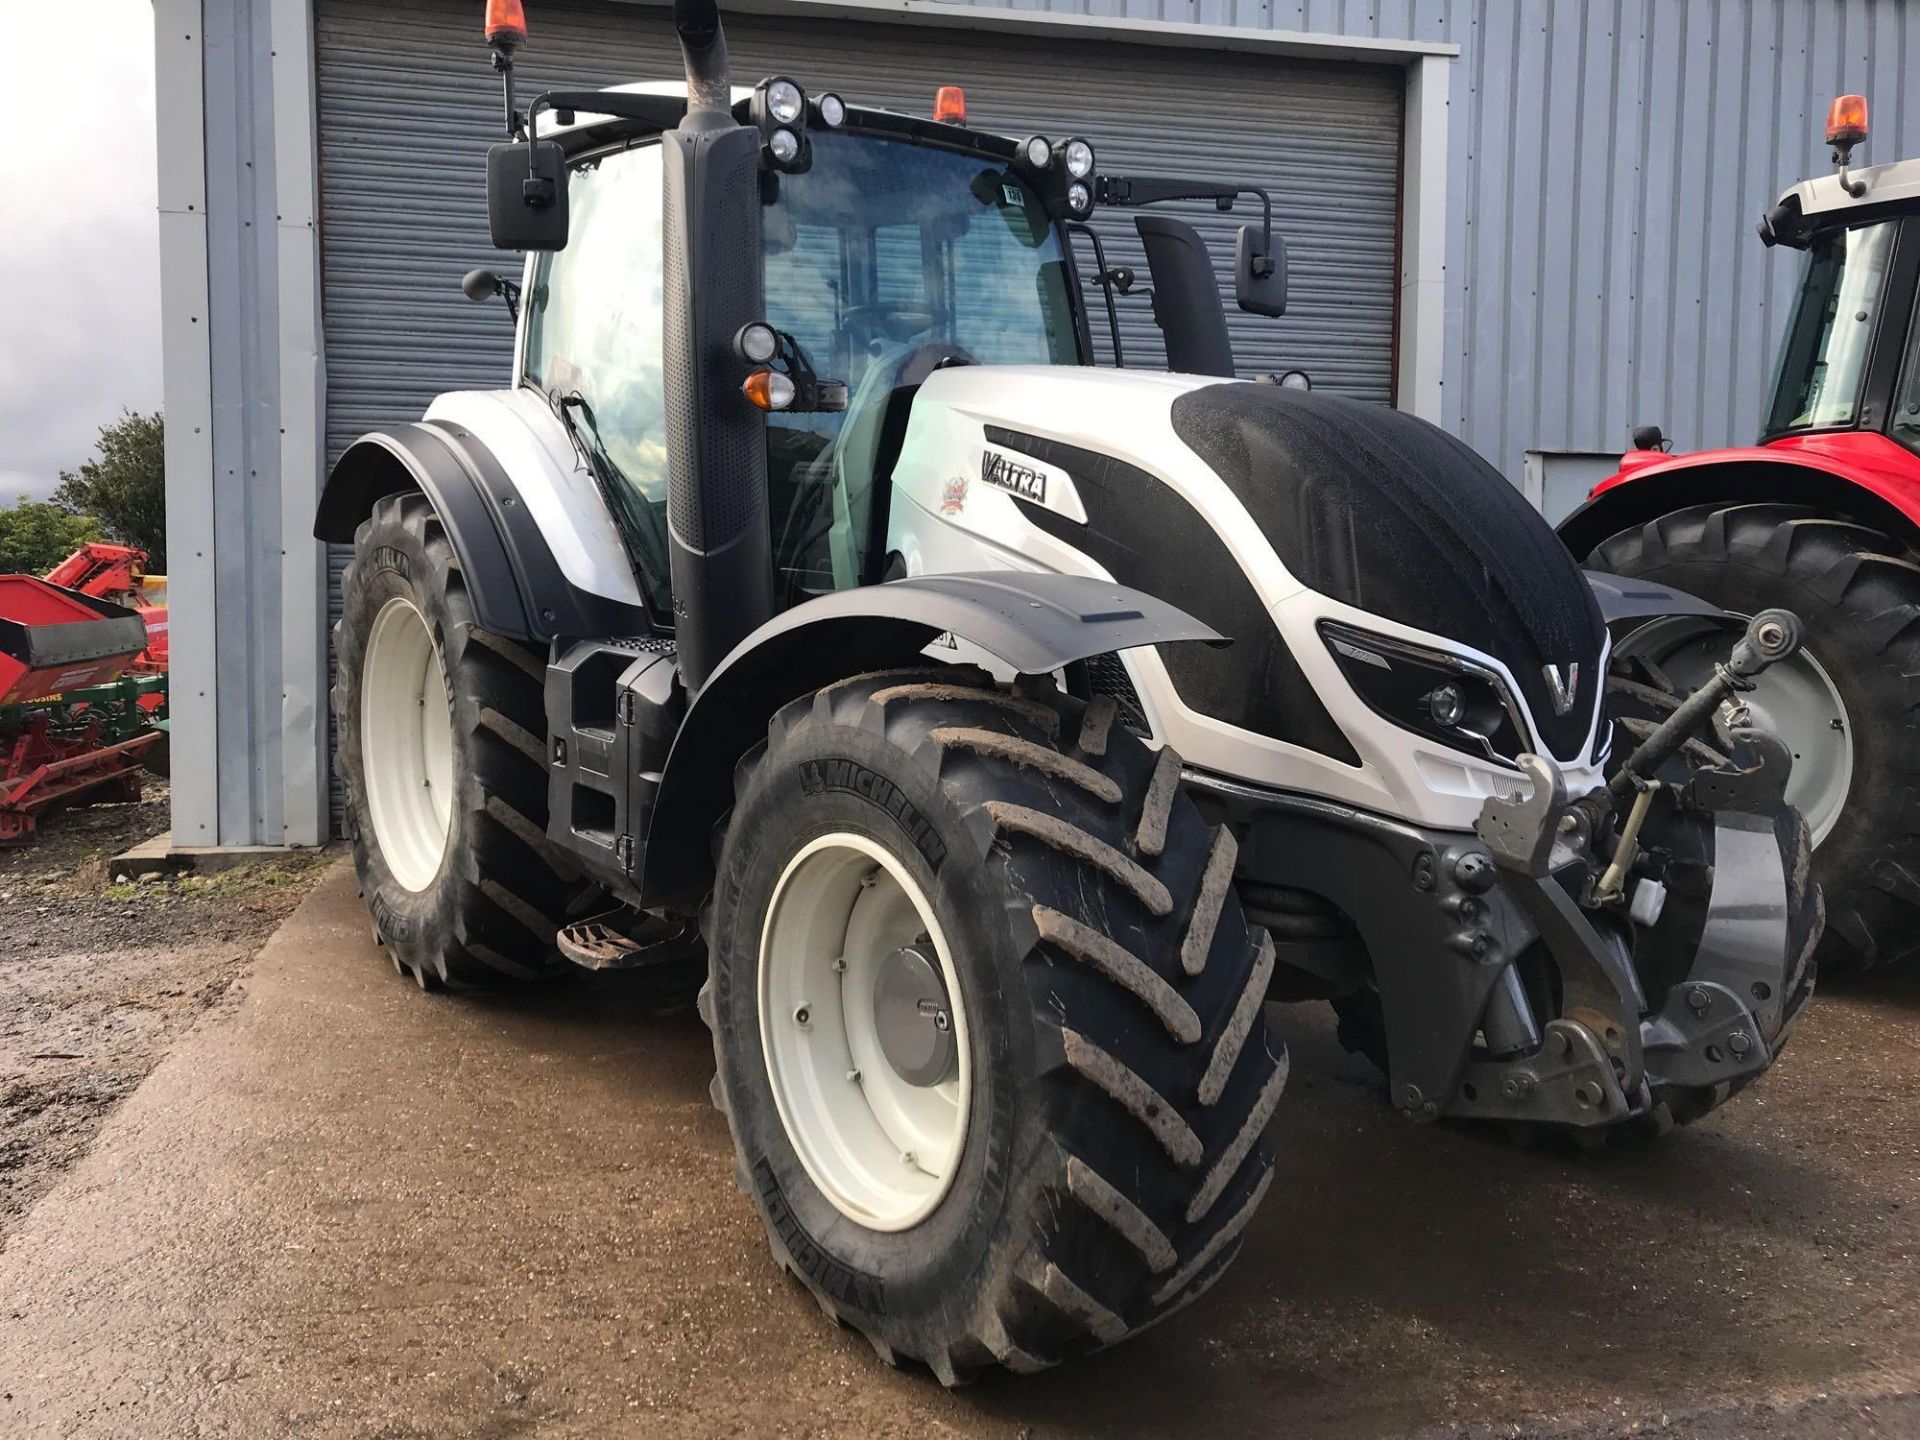 2015 Valtra T174 Versu 50kph tractor, powershift transmission, air suspension, 2 front and 4 rear sp - Image 3 of 15